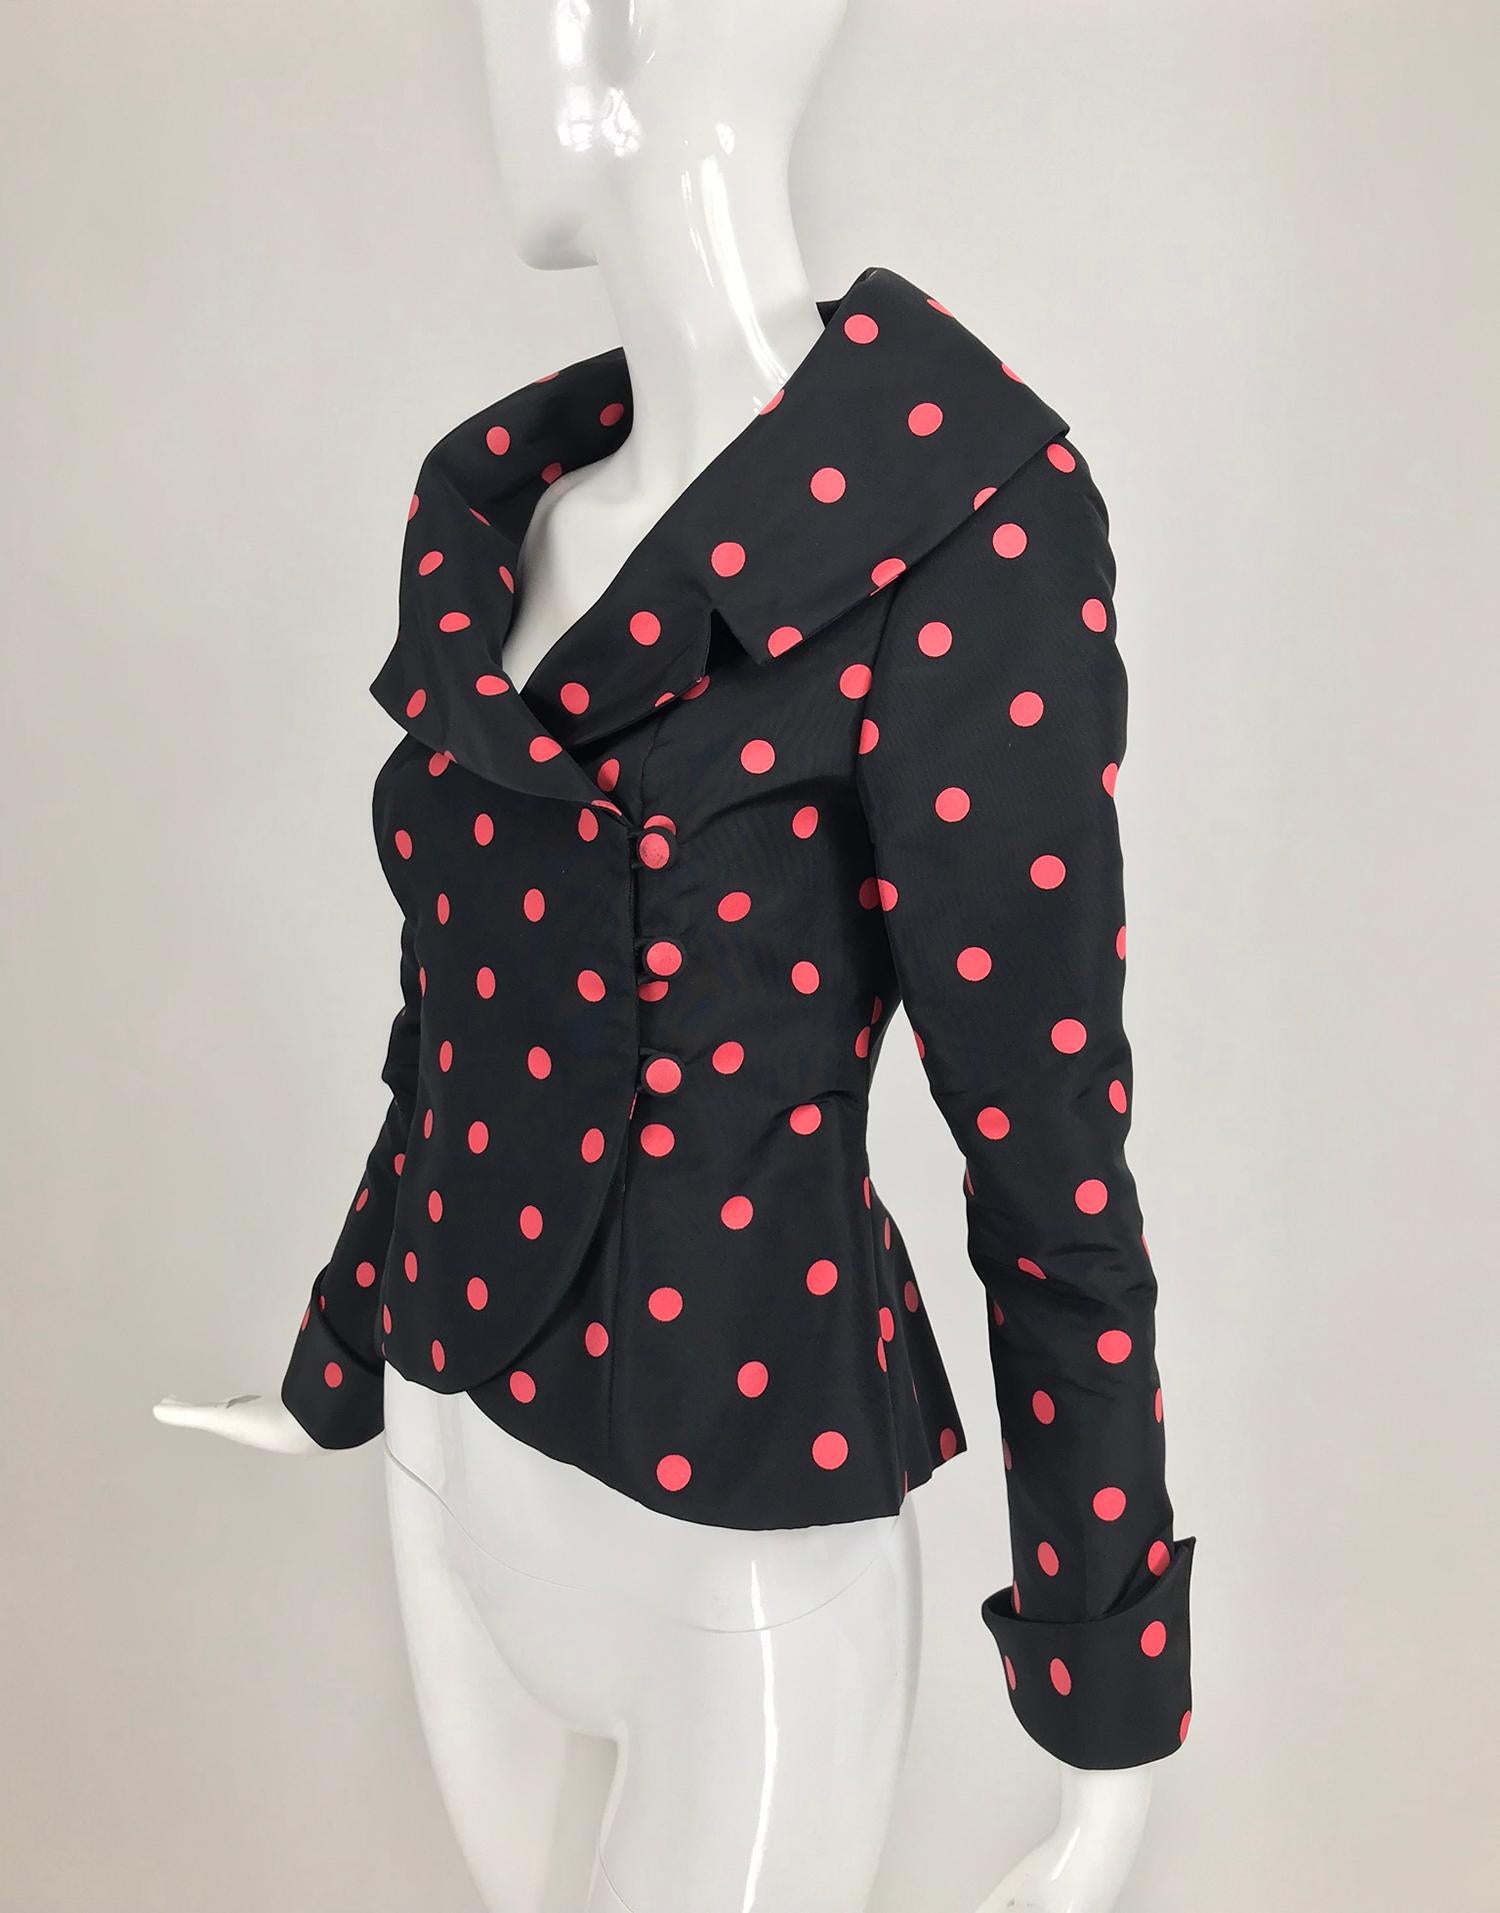 Tosca Couture Black and Red Dot Silk Taffeta Jacket  1